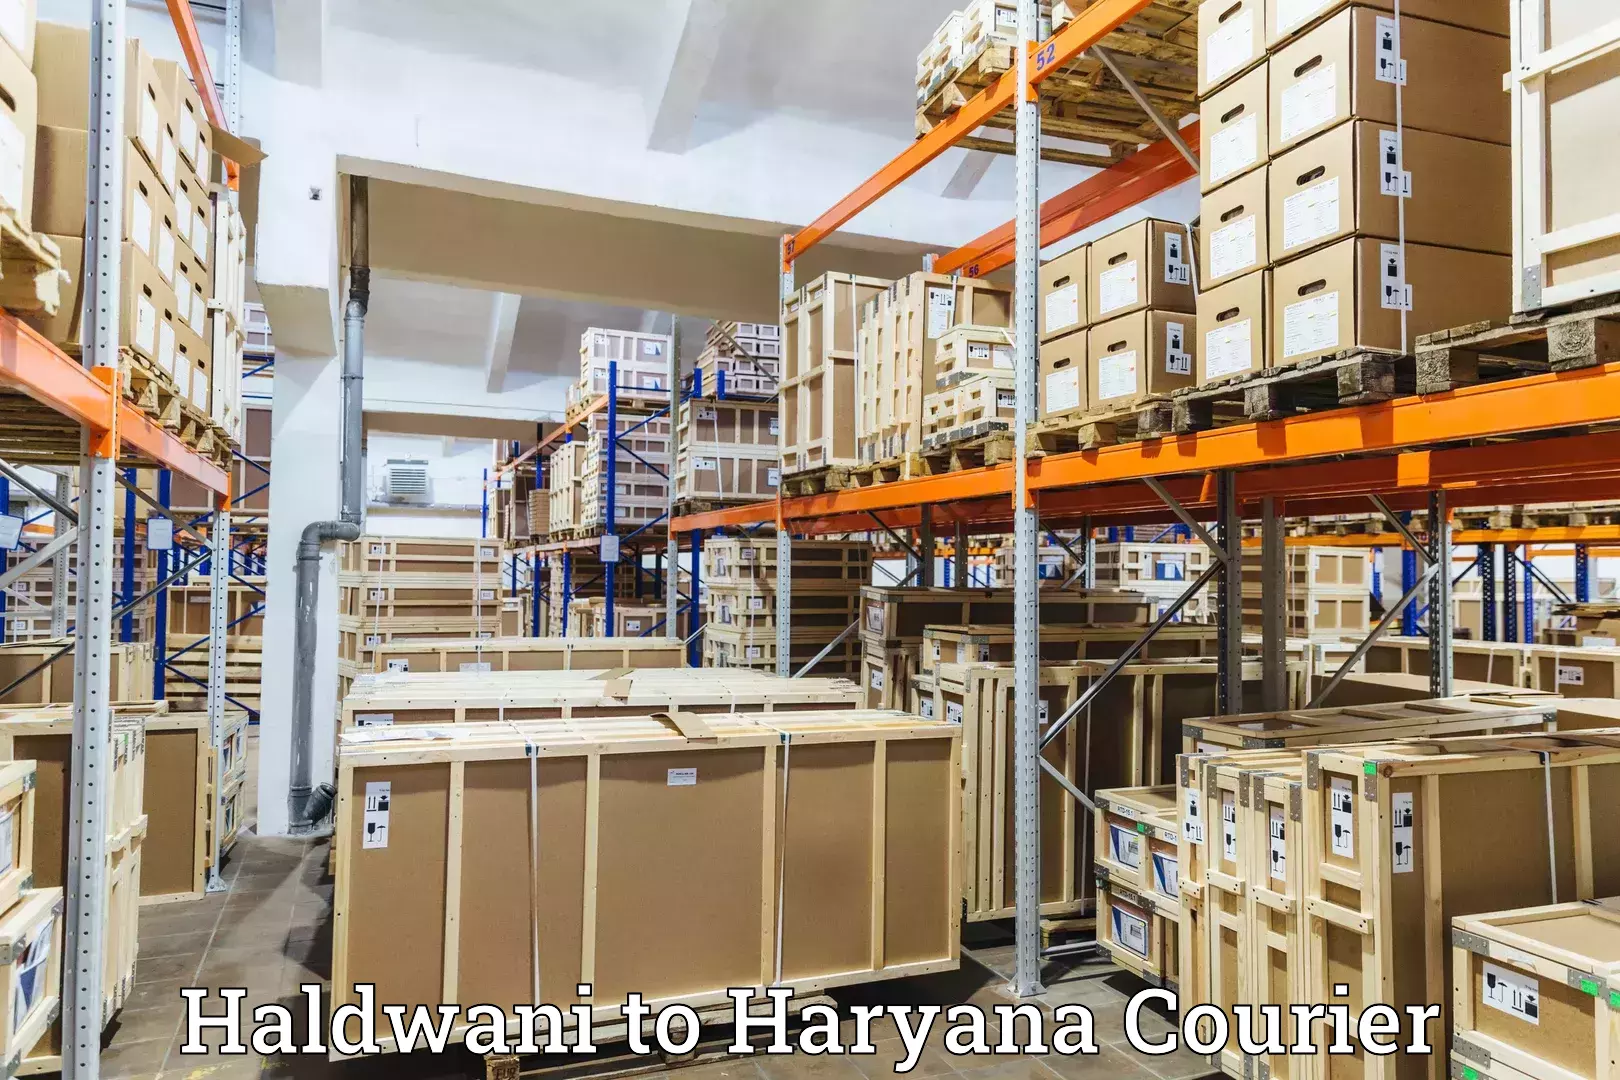 Cost-effective courier solutions in Haldwani to Gurgaon